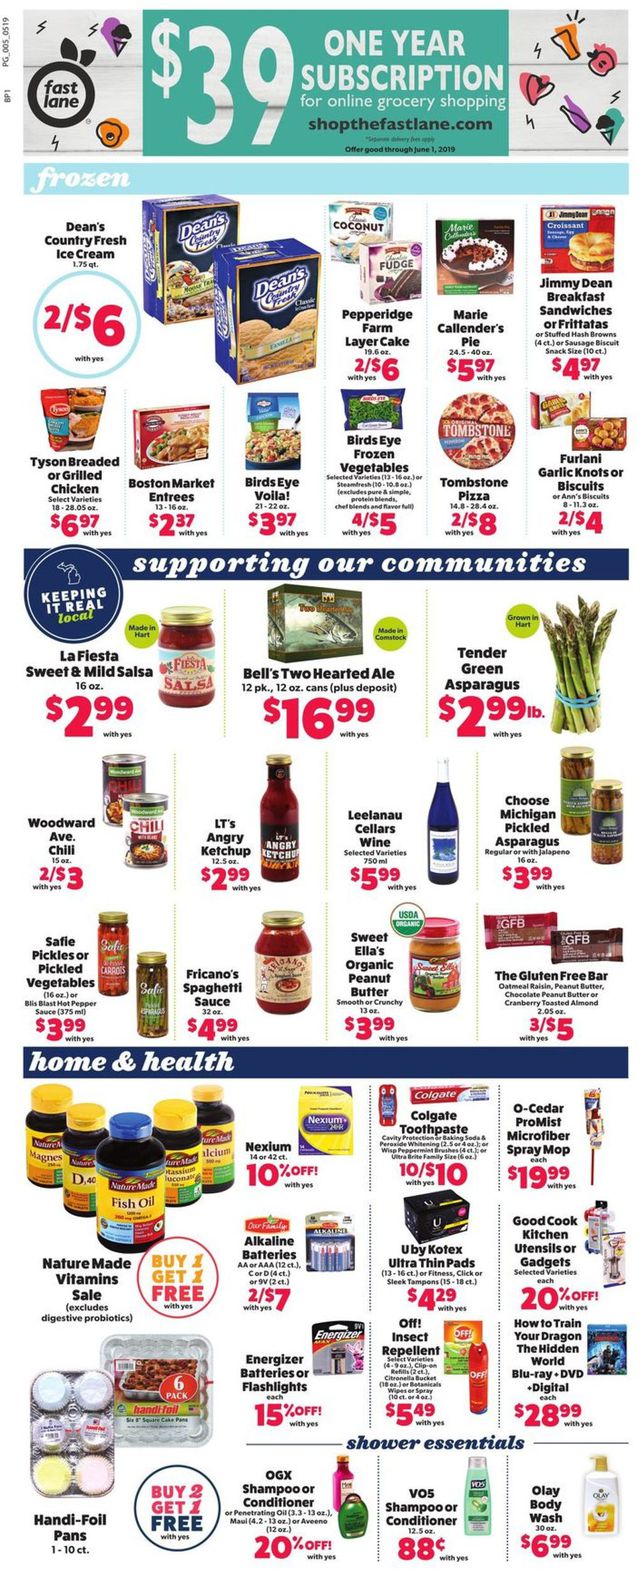 Family Fare Ad from 05/19/2019